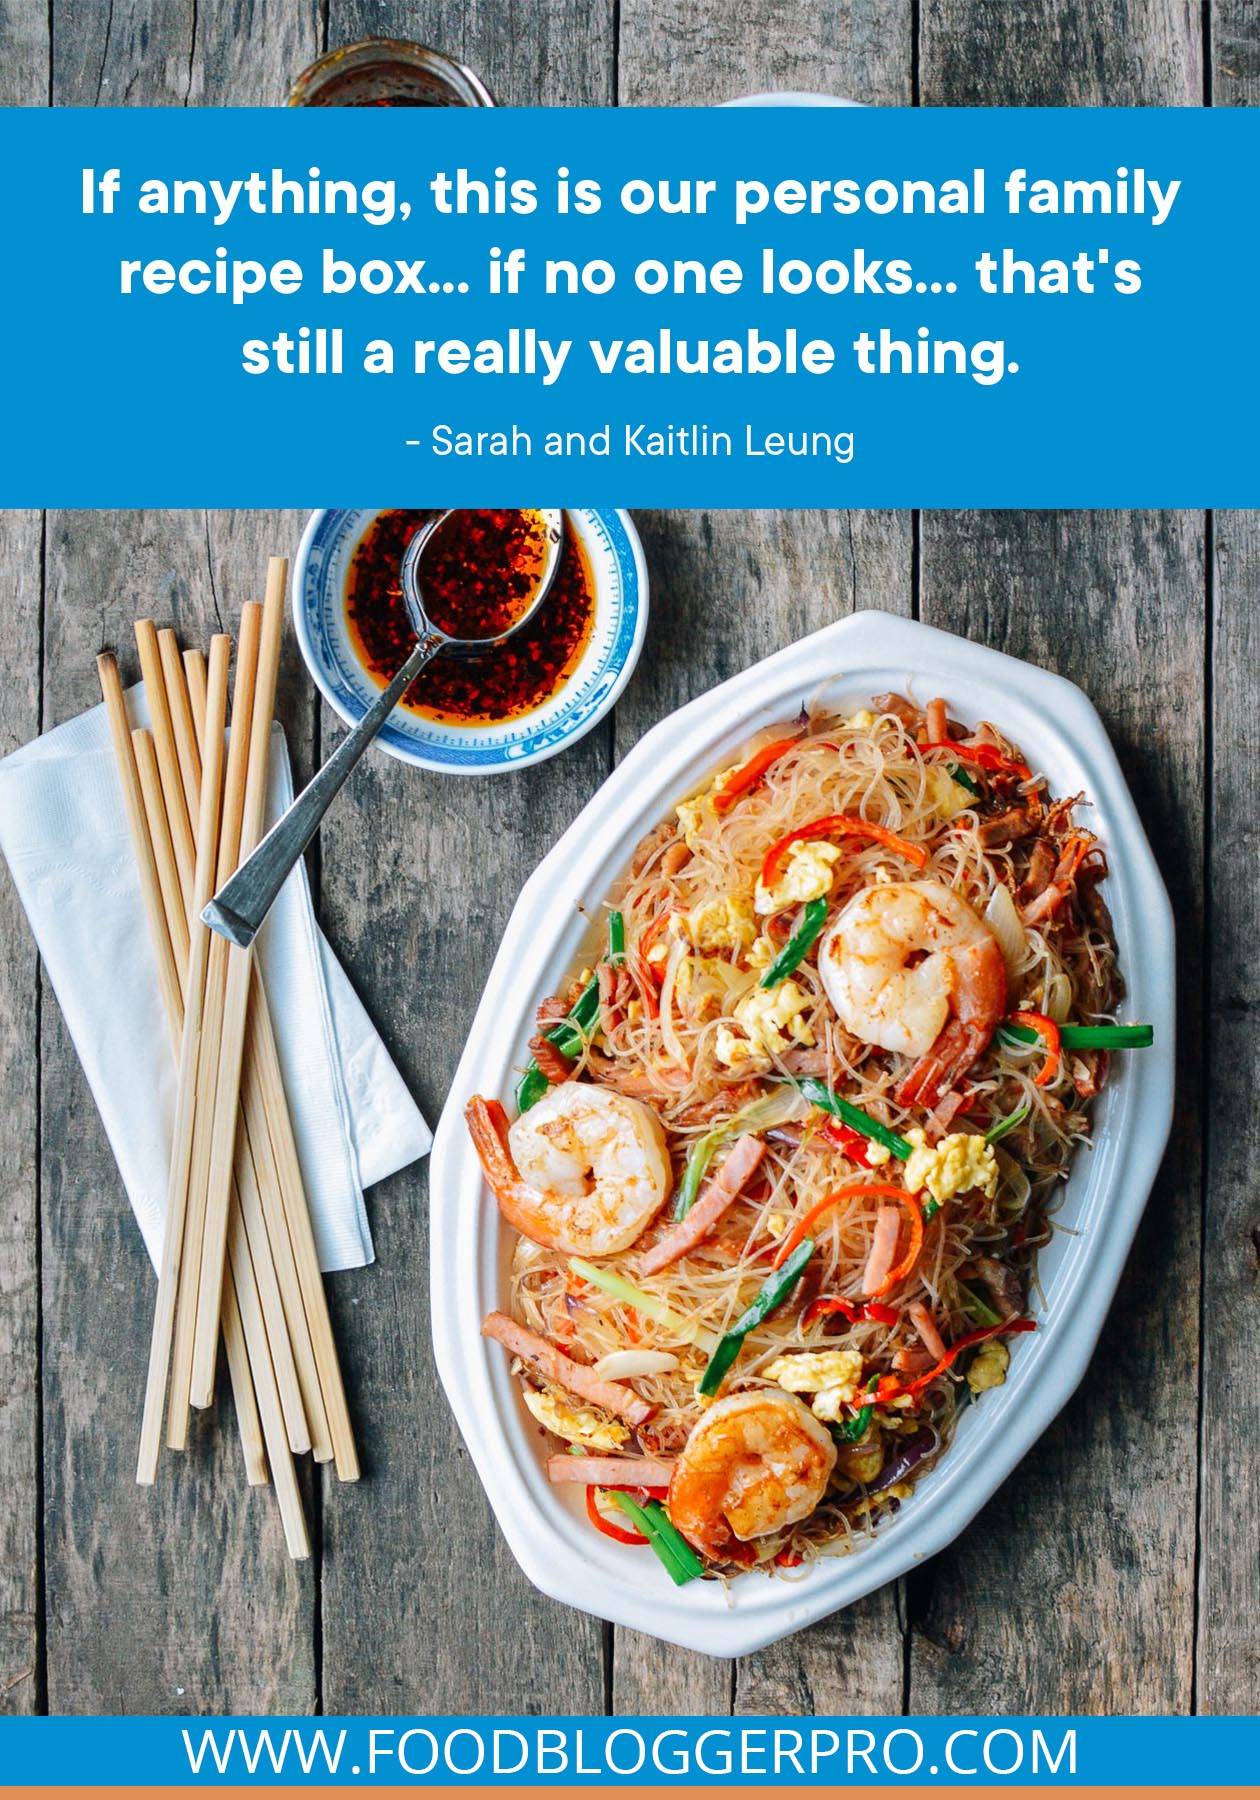 A photograph of a platter of shrimp, noodles and vegetables with a quote from Sarah and Kaitlin Leung's episode of The Food Blogger Pro Podcast: "If anything, this is our personal family recipe box... if no one looks... that's still a really valuable thing."